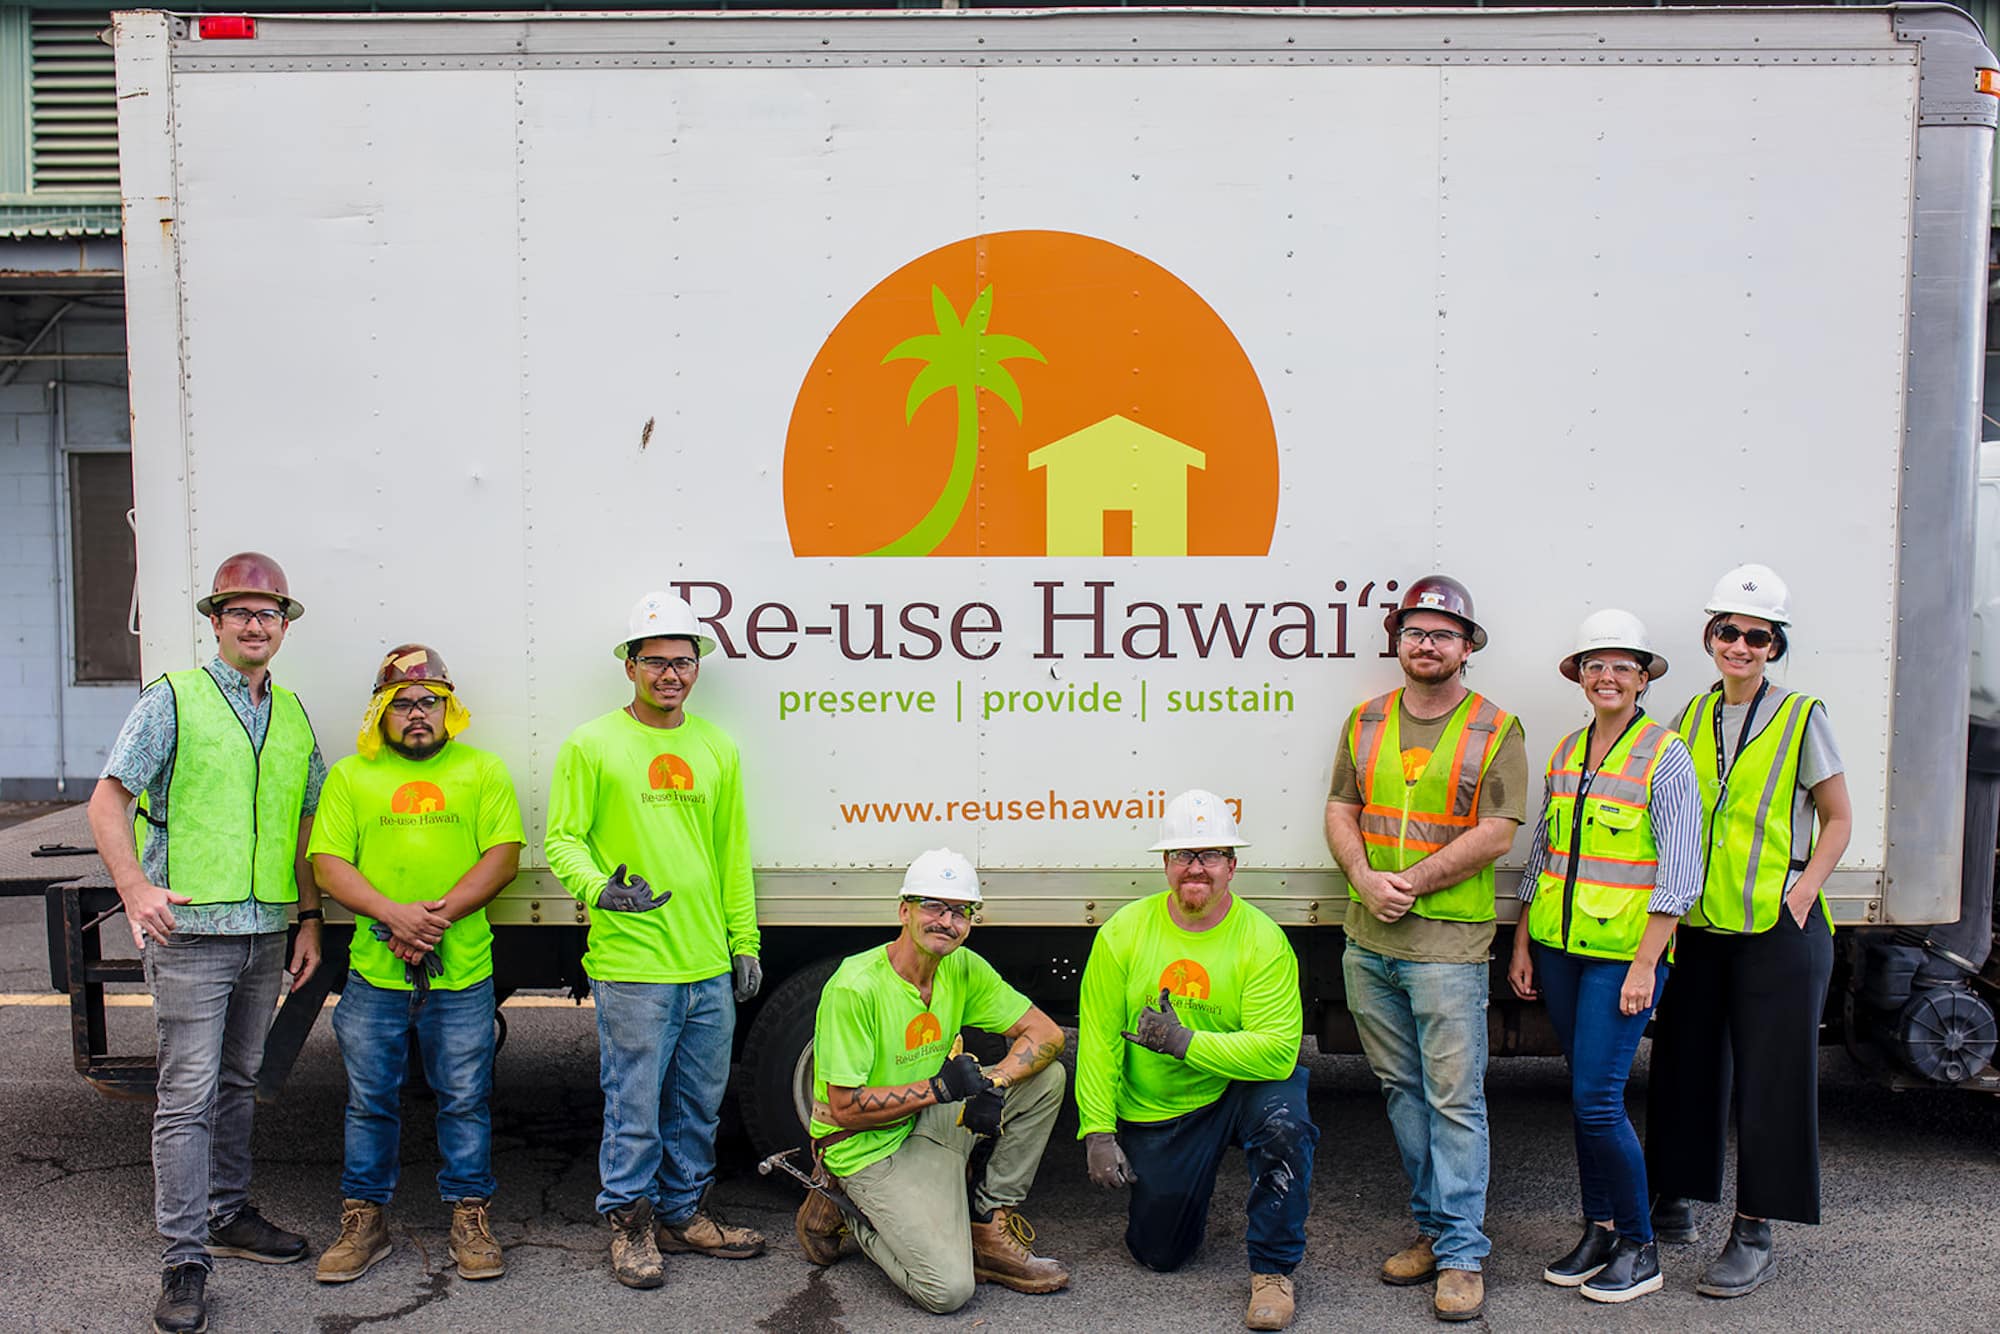 People wearing construction gear and hard hats posing in front of a large Re-use Hawaii cargo truck.